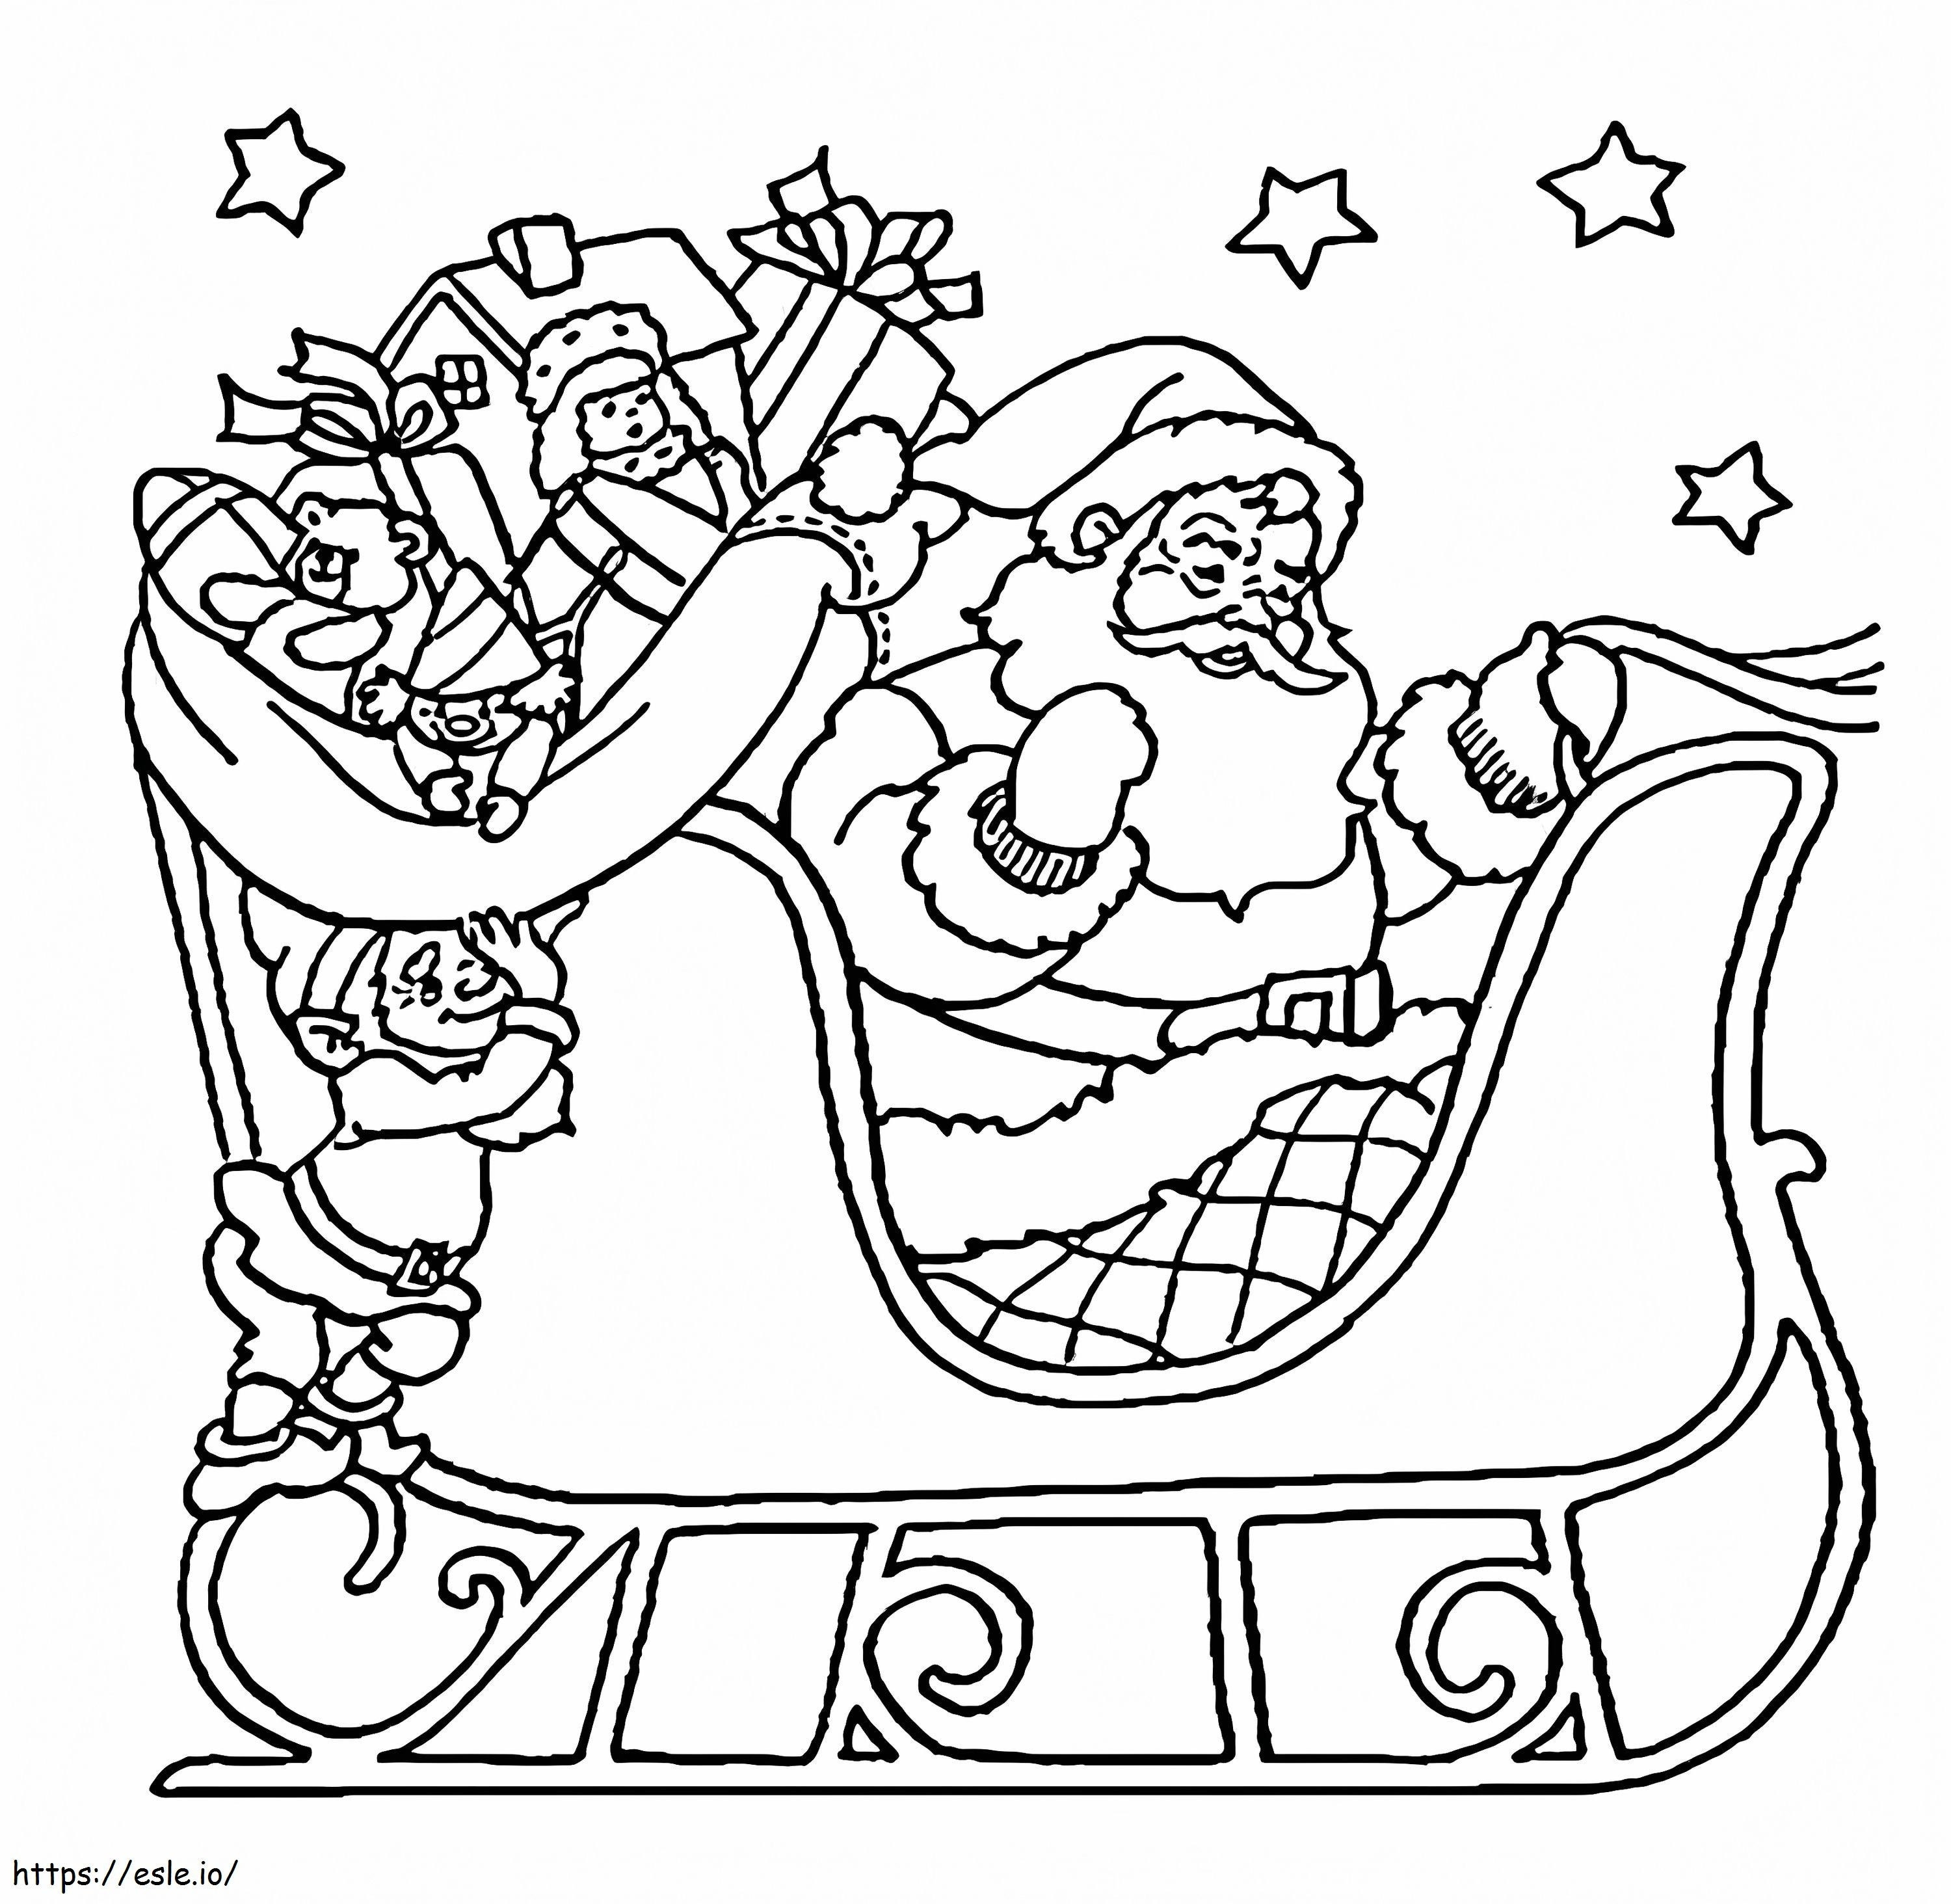 Santa Claus On Sleigh coloring page